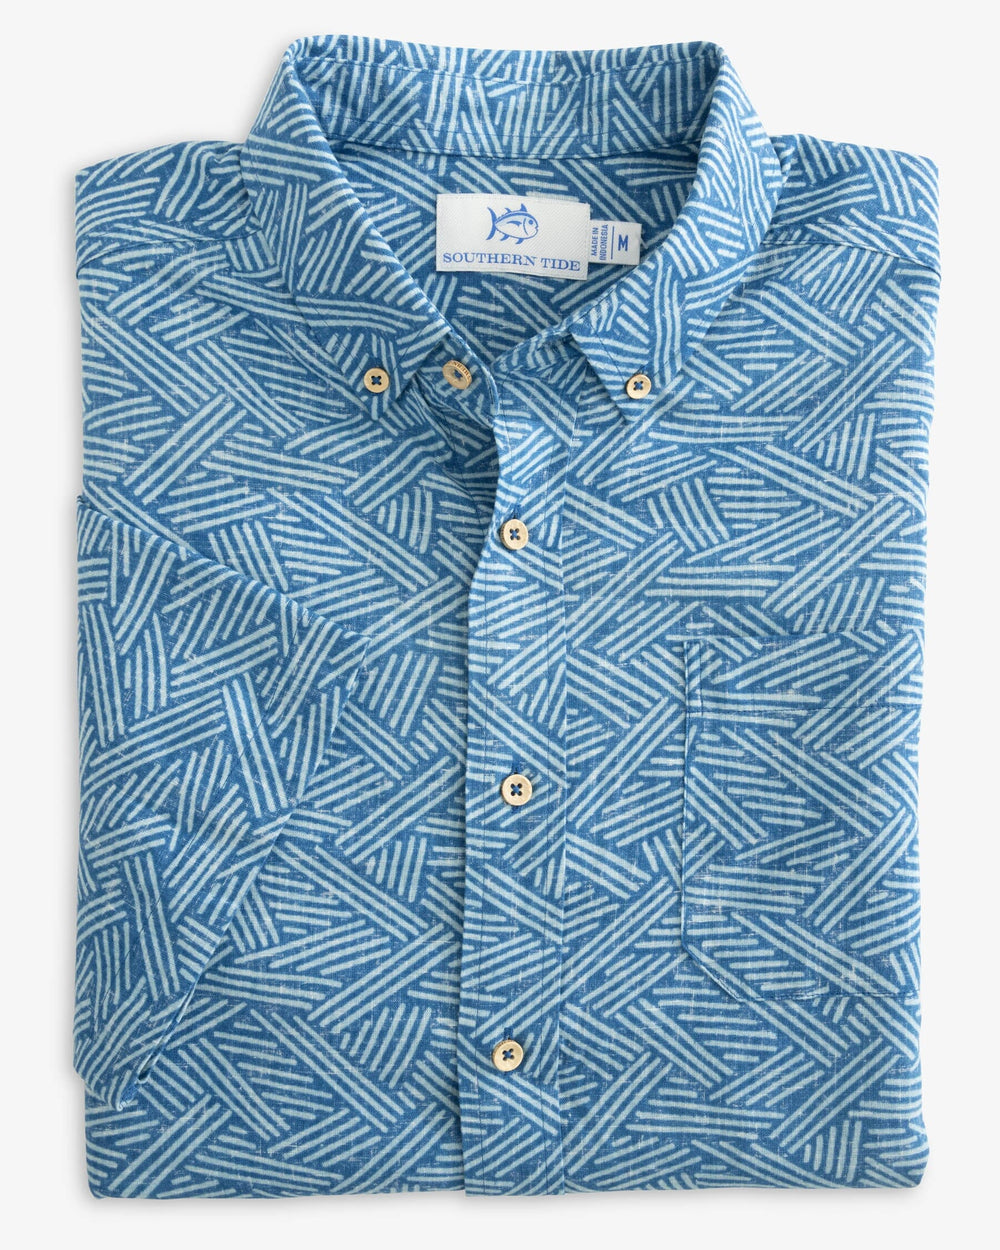 The fold view of the Southern Tide Abstract Scribble Short Sleeve Button Down Shirt by Southern Tide - Atlantic Blue